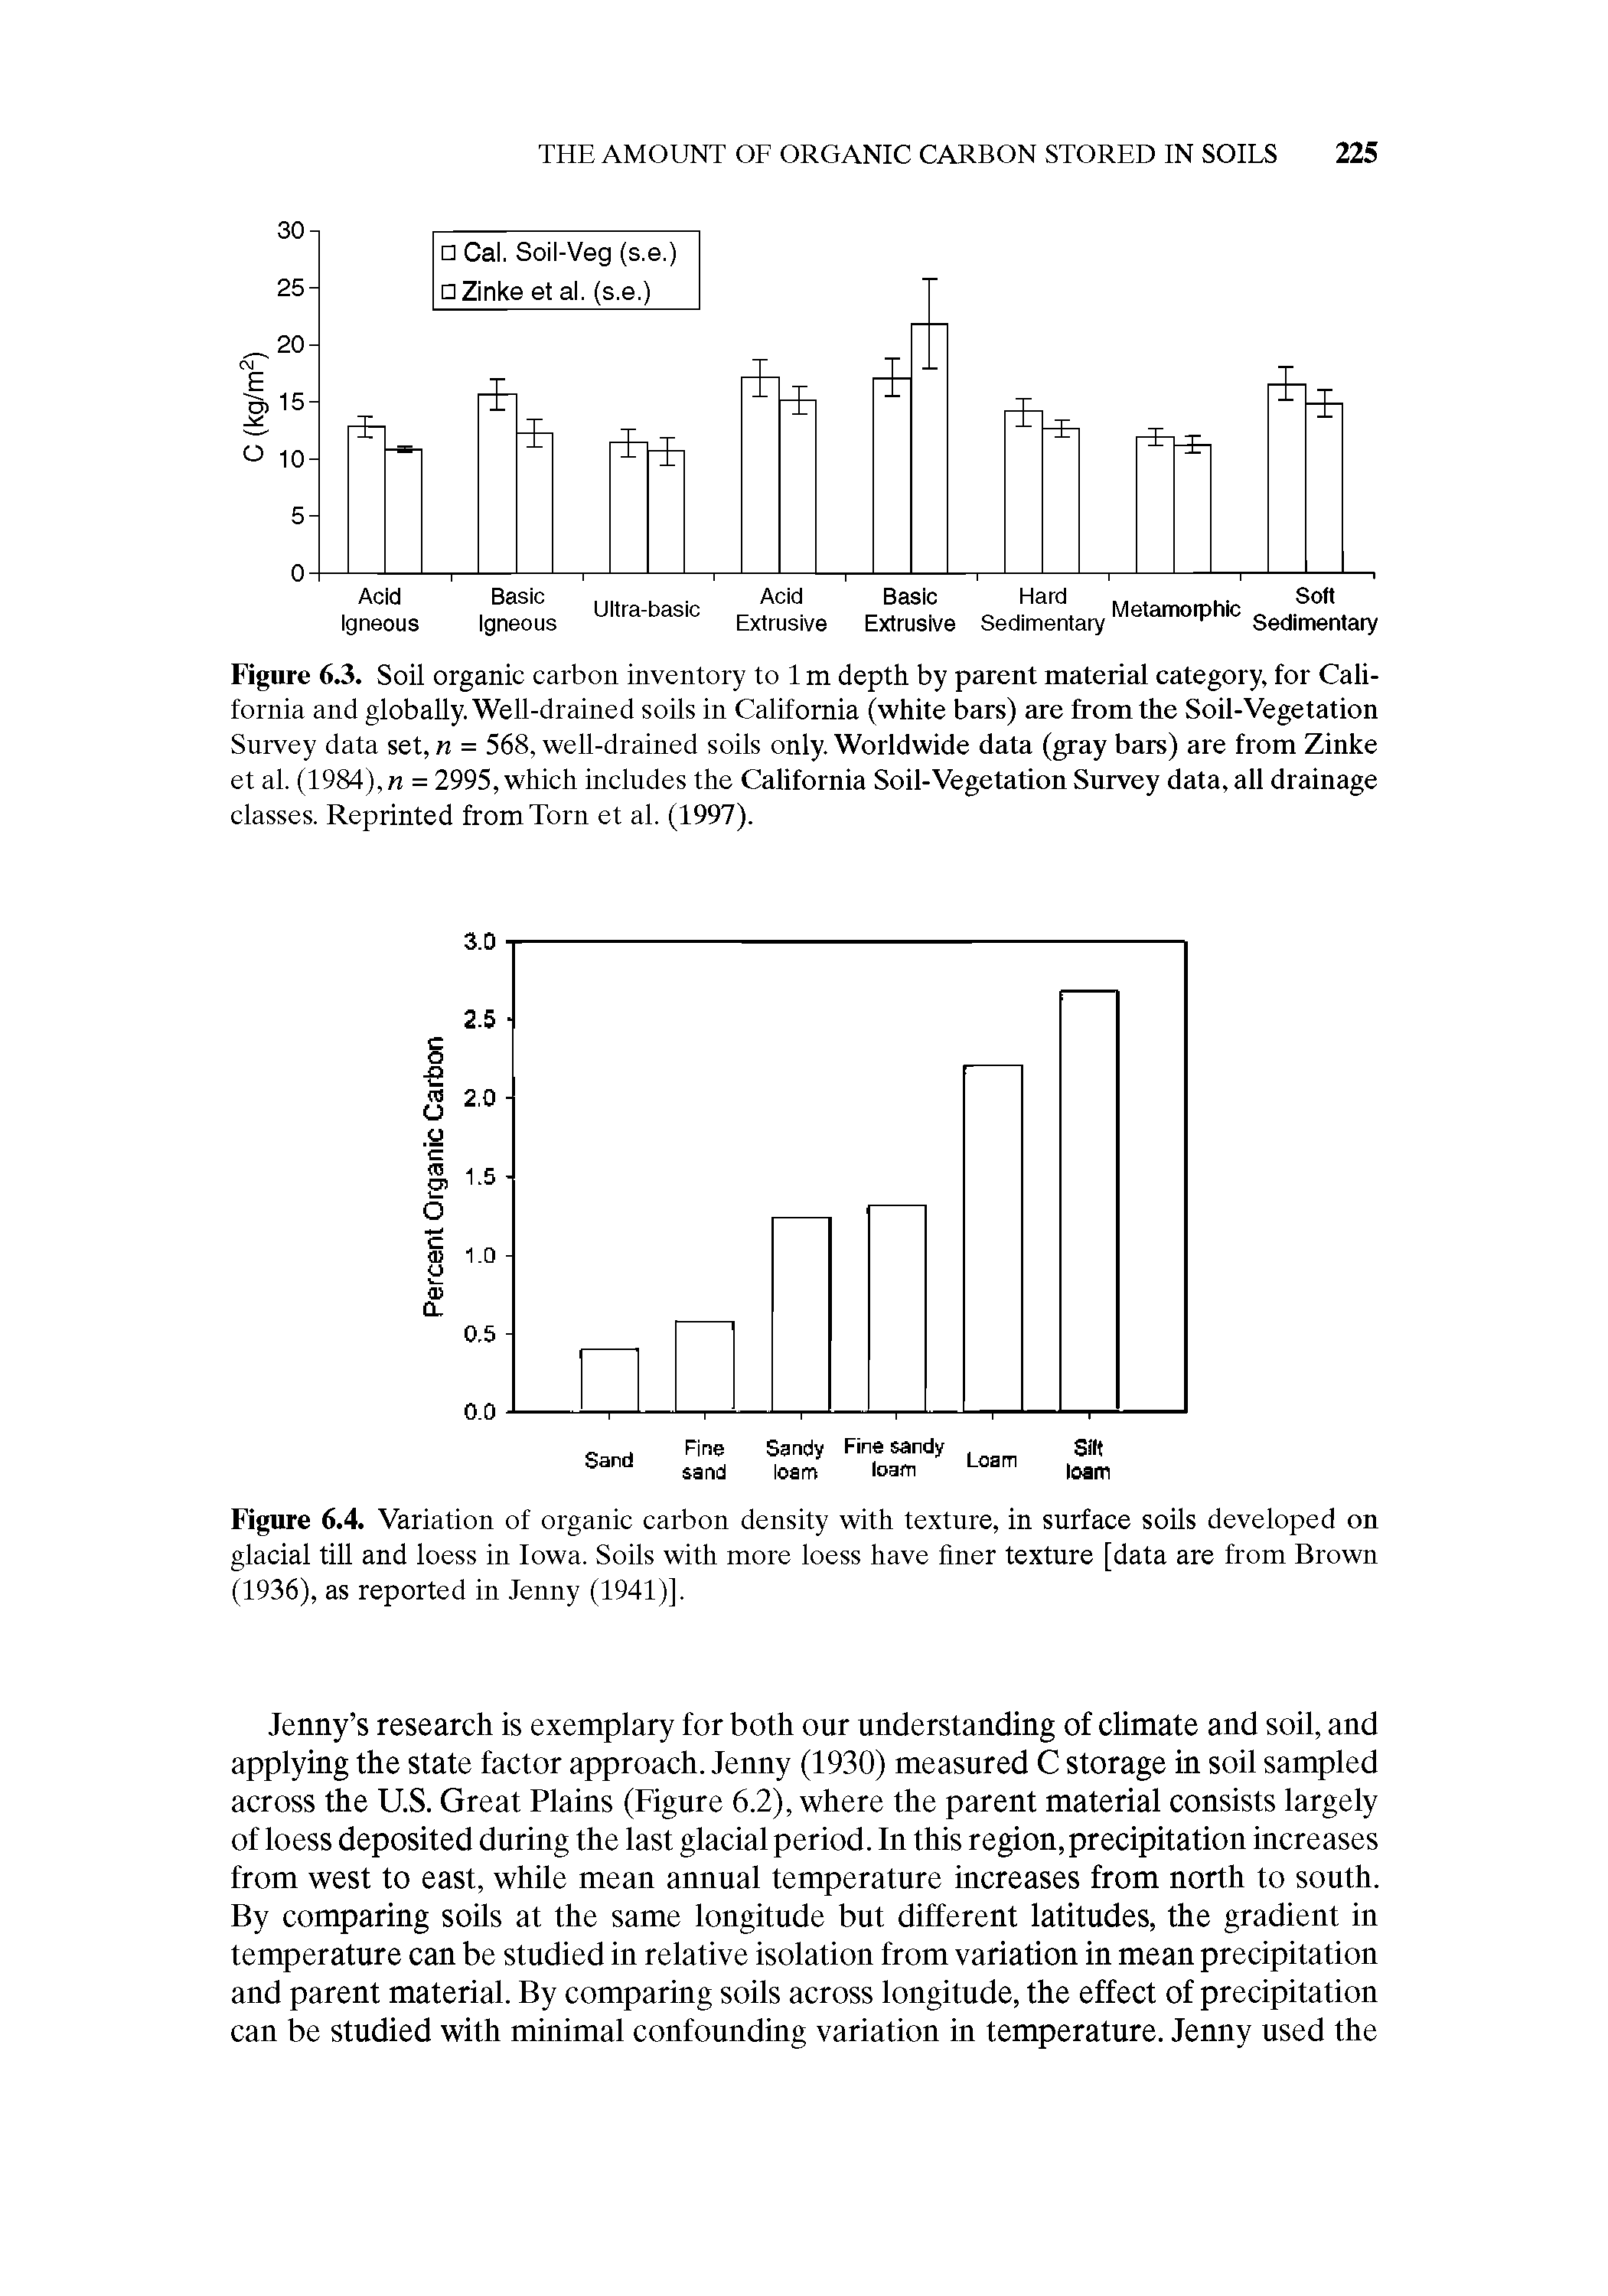 Figure 6.4. Variation of organic carbon density with texture, in surface soils developed on glacial till and loess in Iowa. Soils with more loess have finer texture [data are from Brown (1936), as reported in Jenny (1941)].